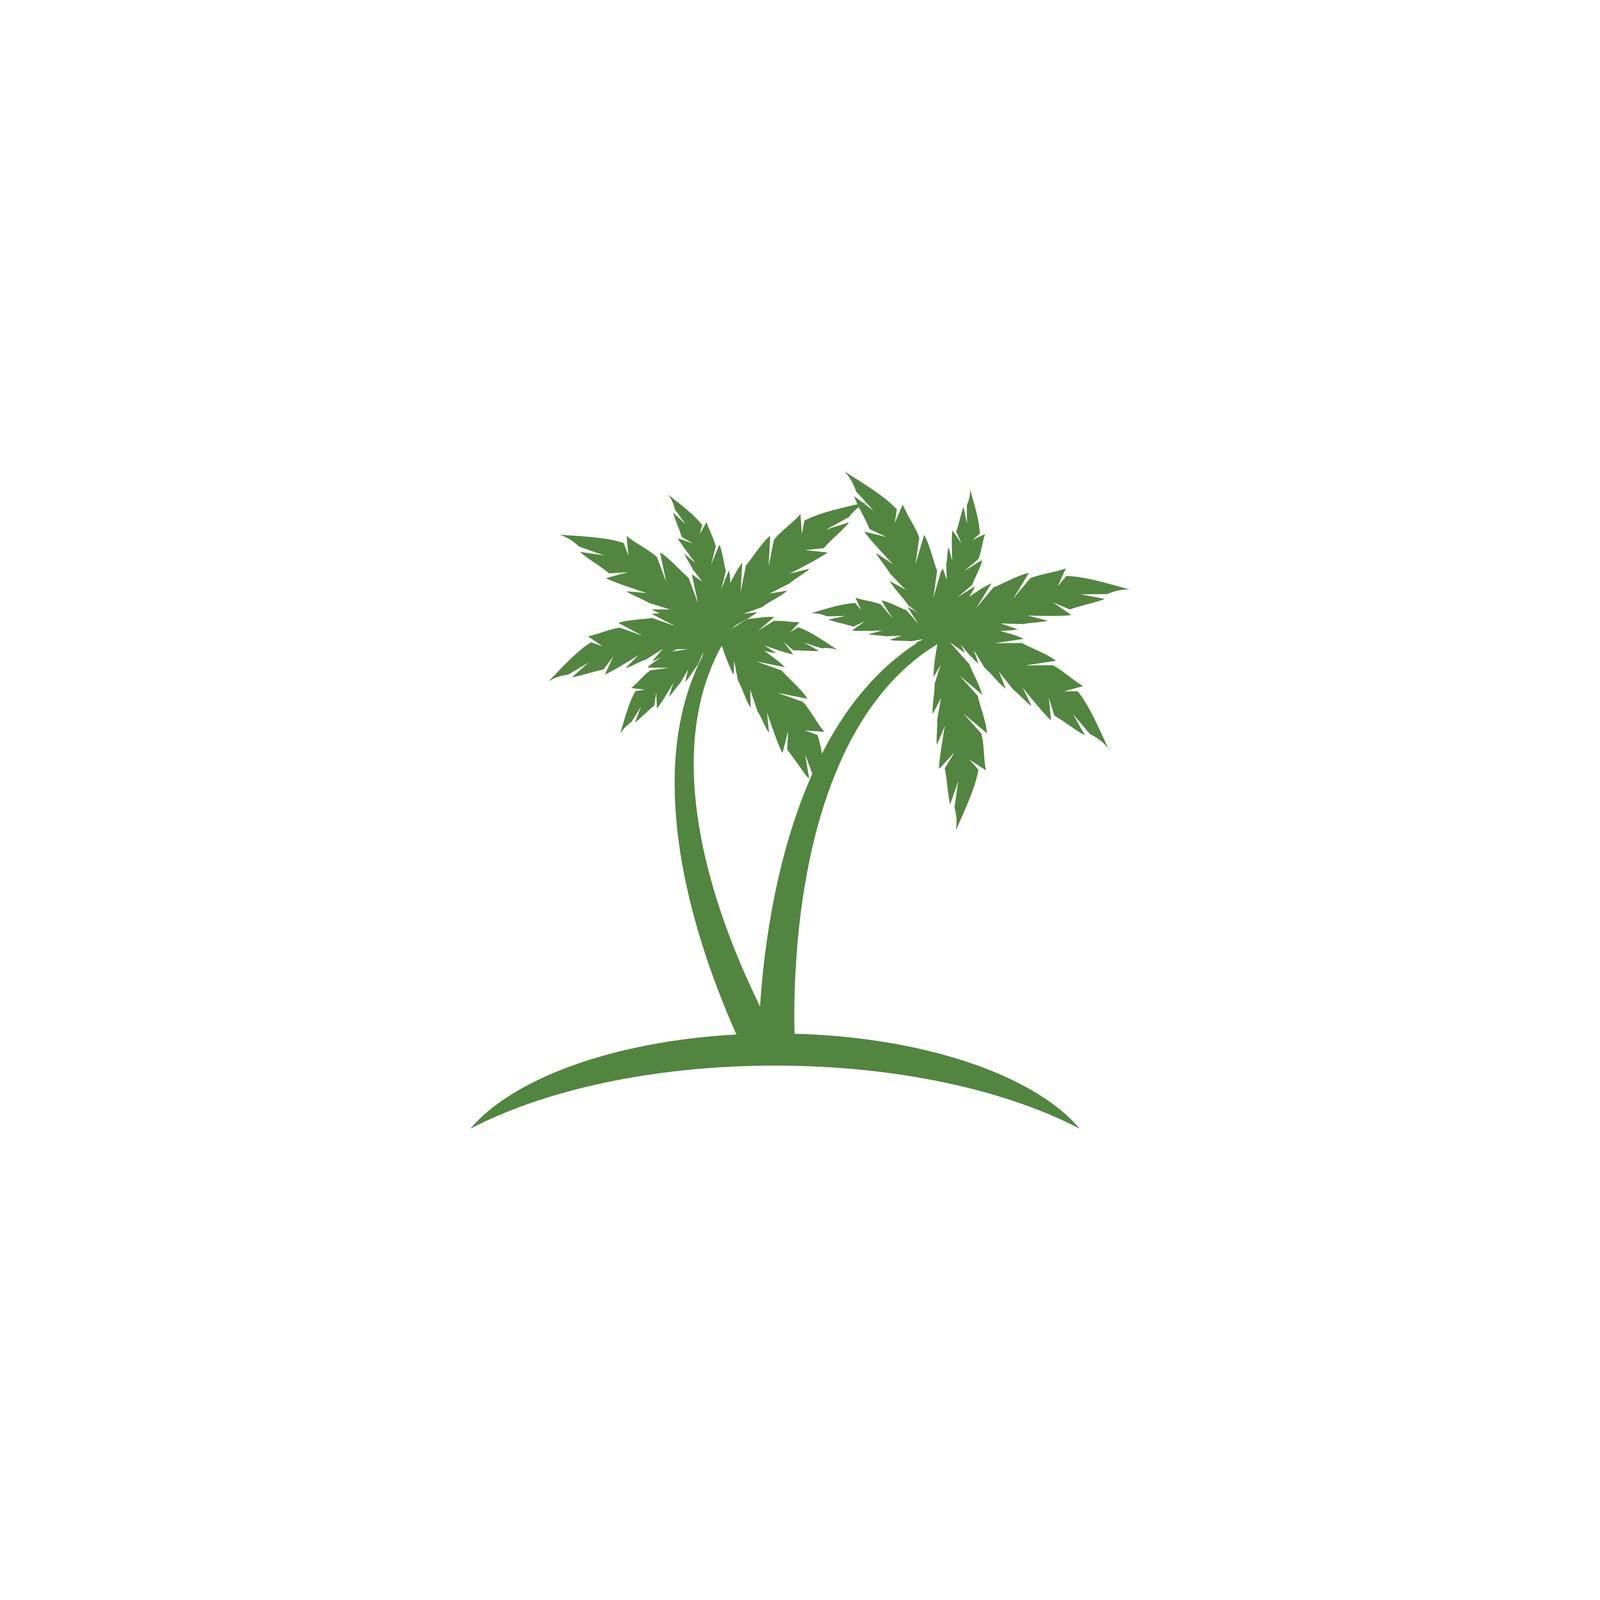 Palm tree summer logo template by awk